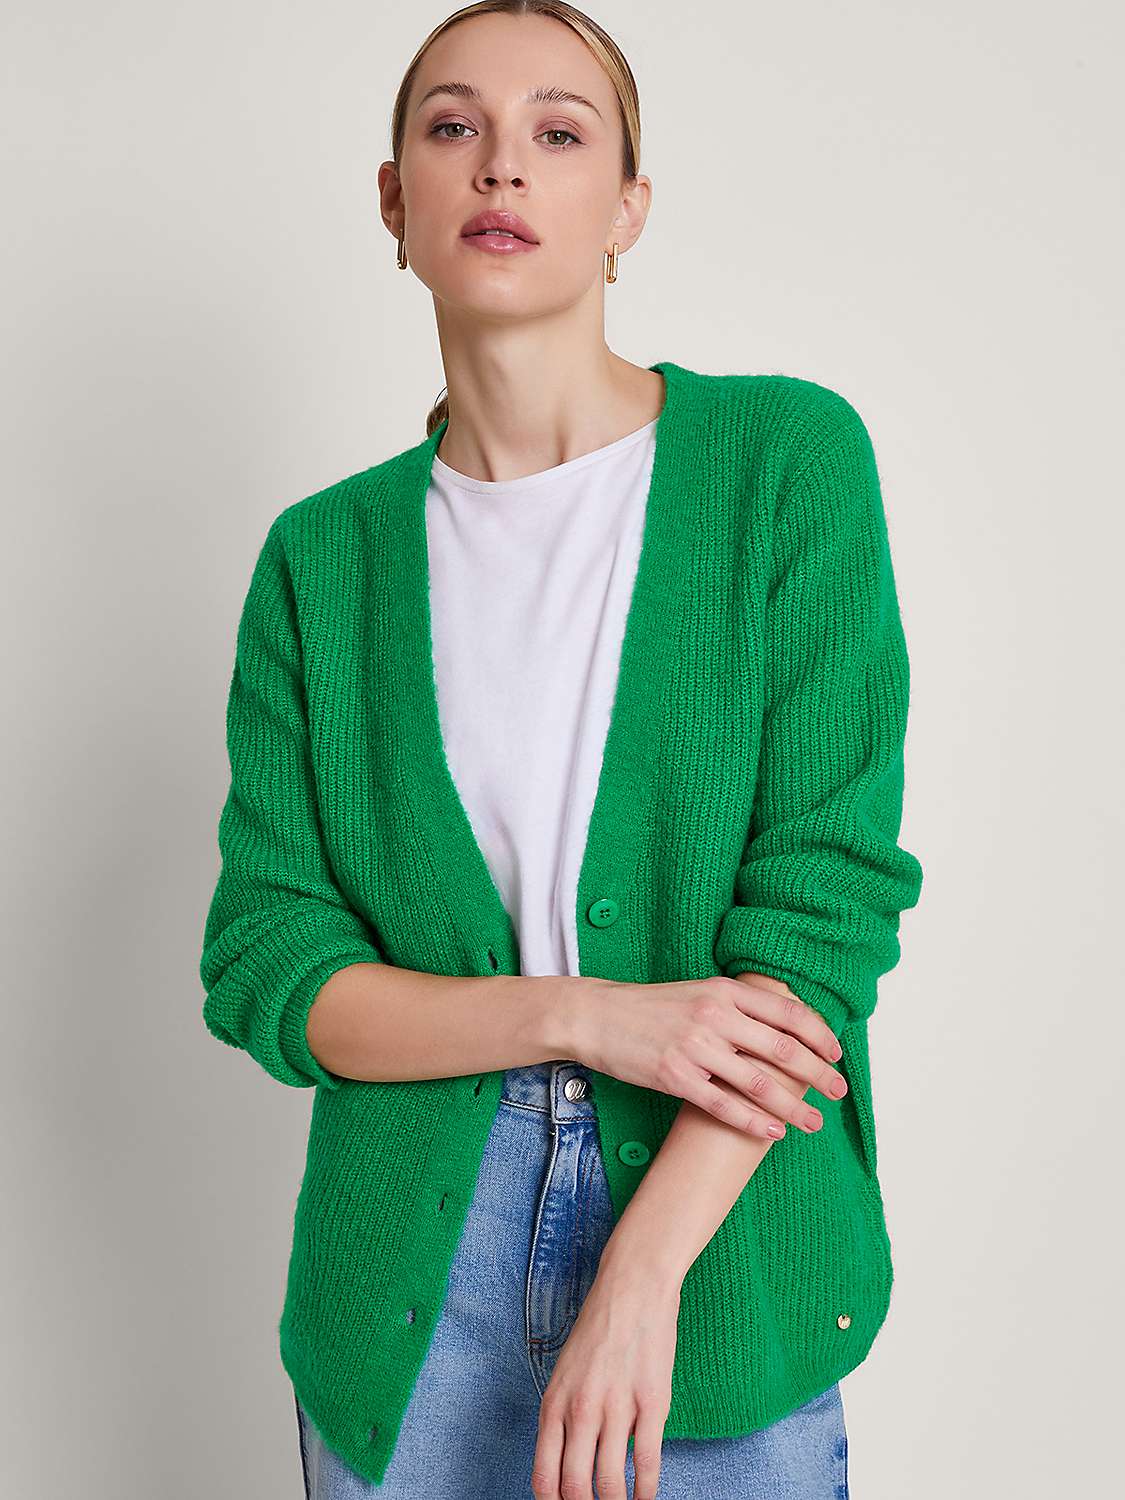 Buy Monsoon Sula Supersoft Rib Knit Cardigan, Green Online at johnlewis.com